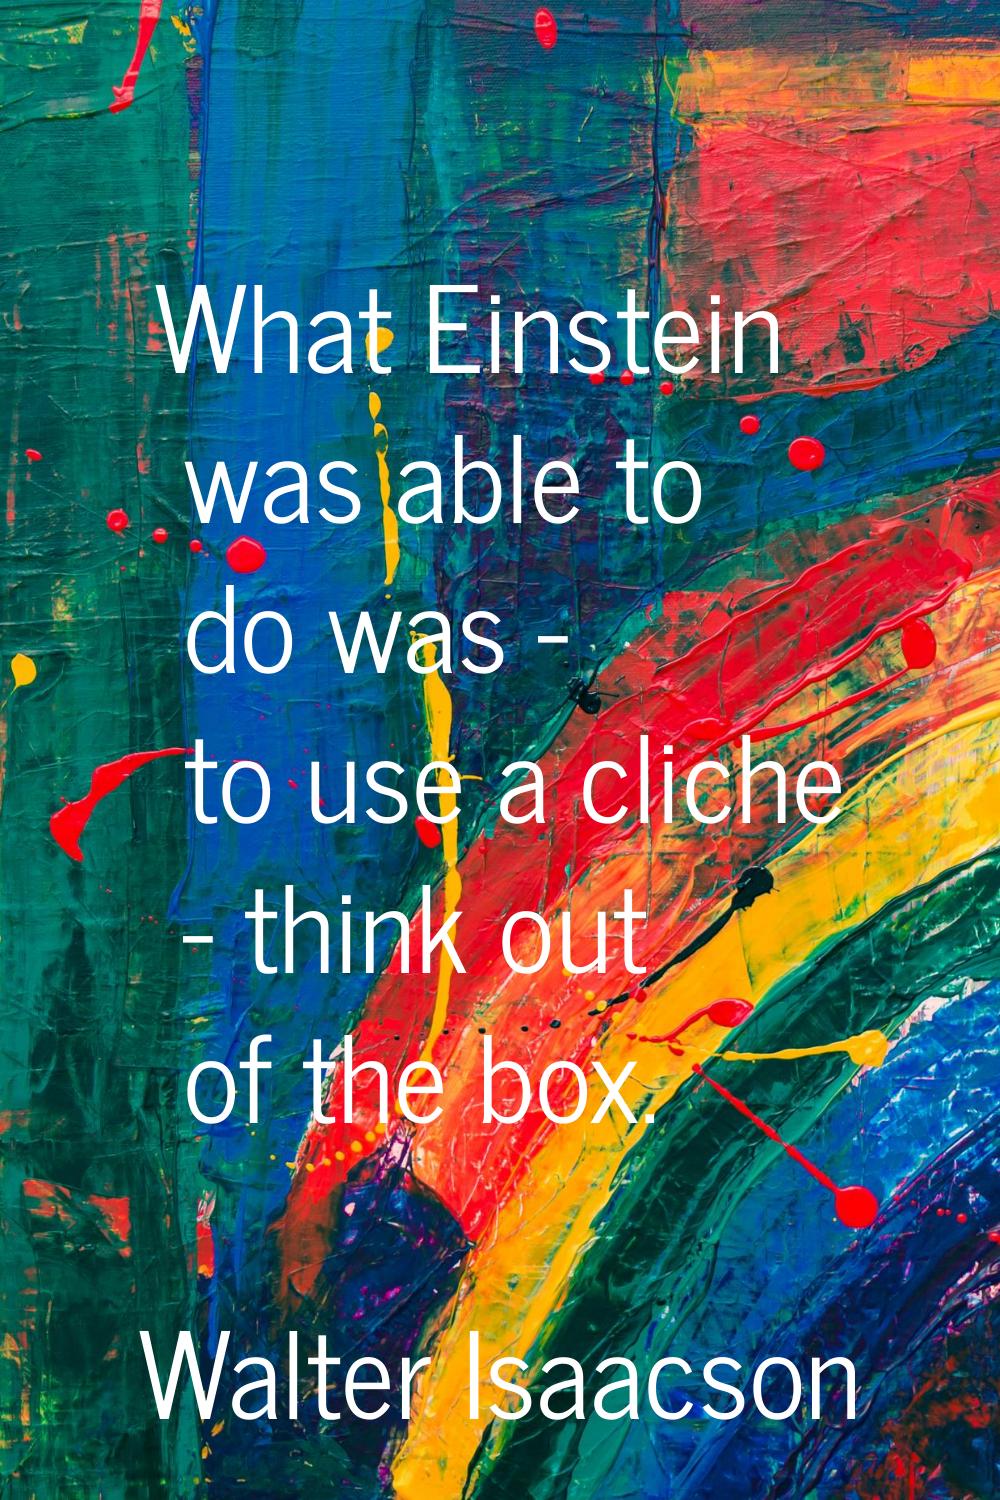 What Einstein was able to do was - to use a cliche - think out of the box.